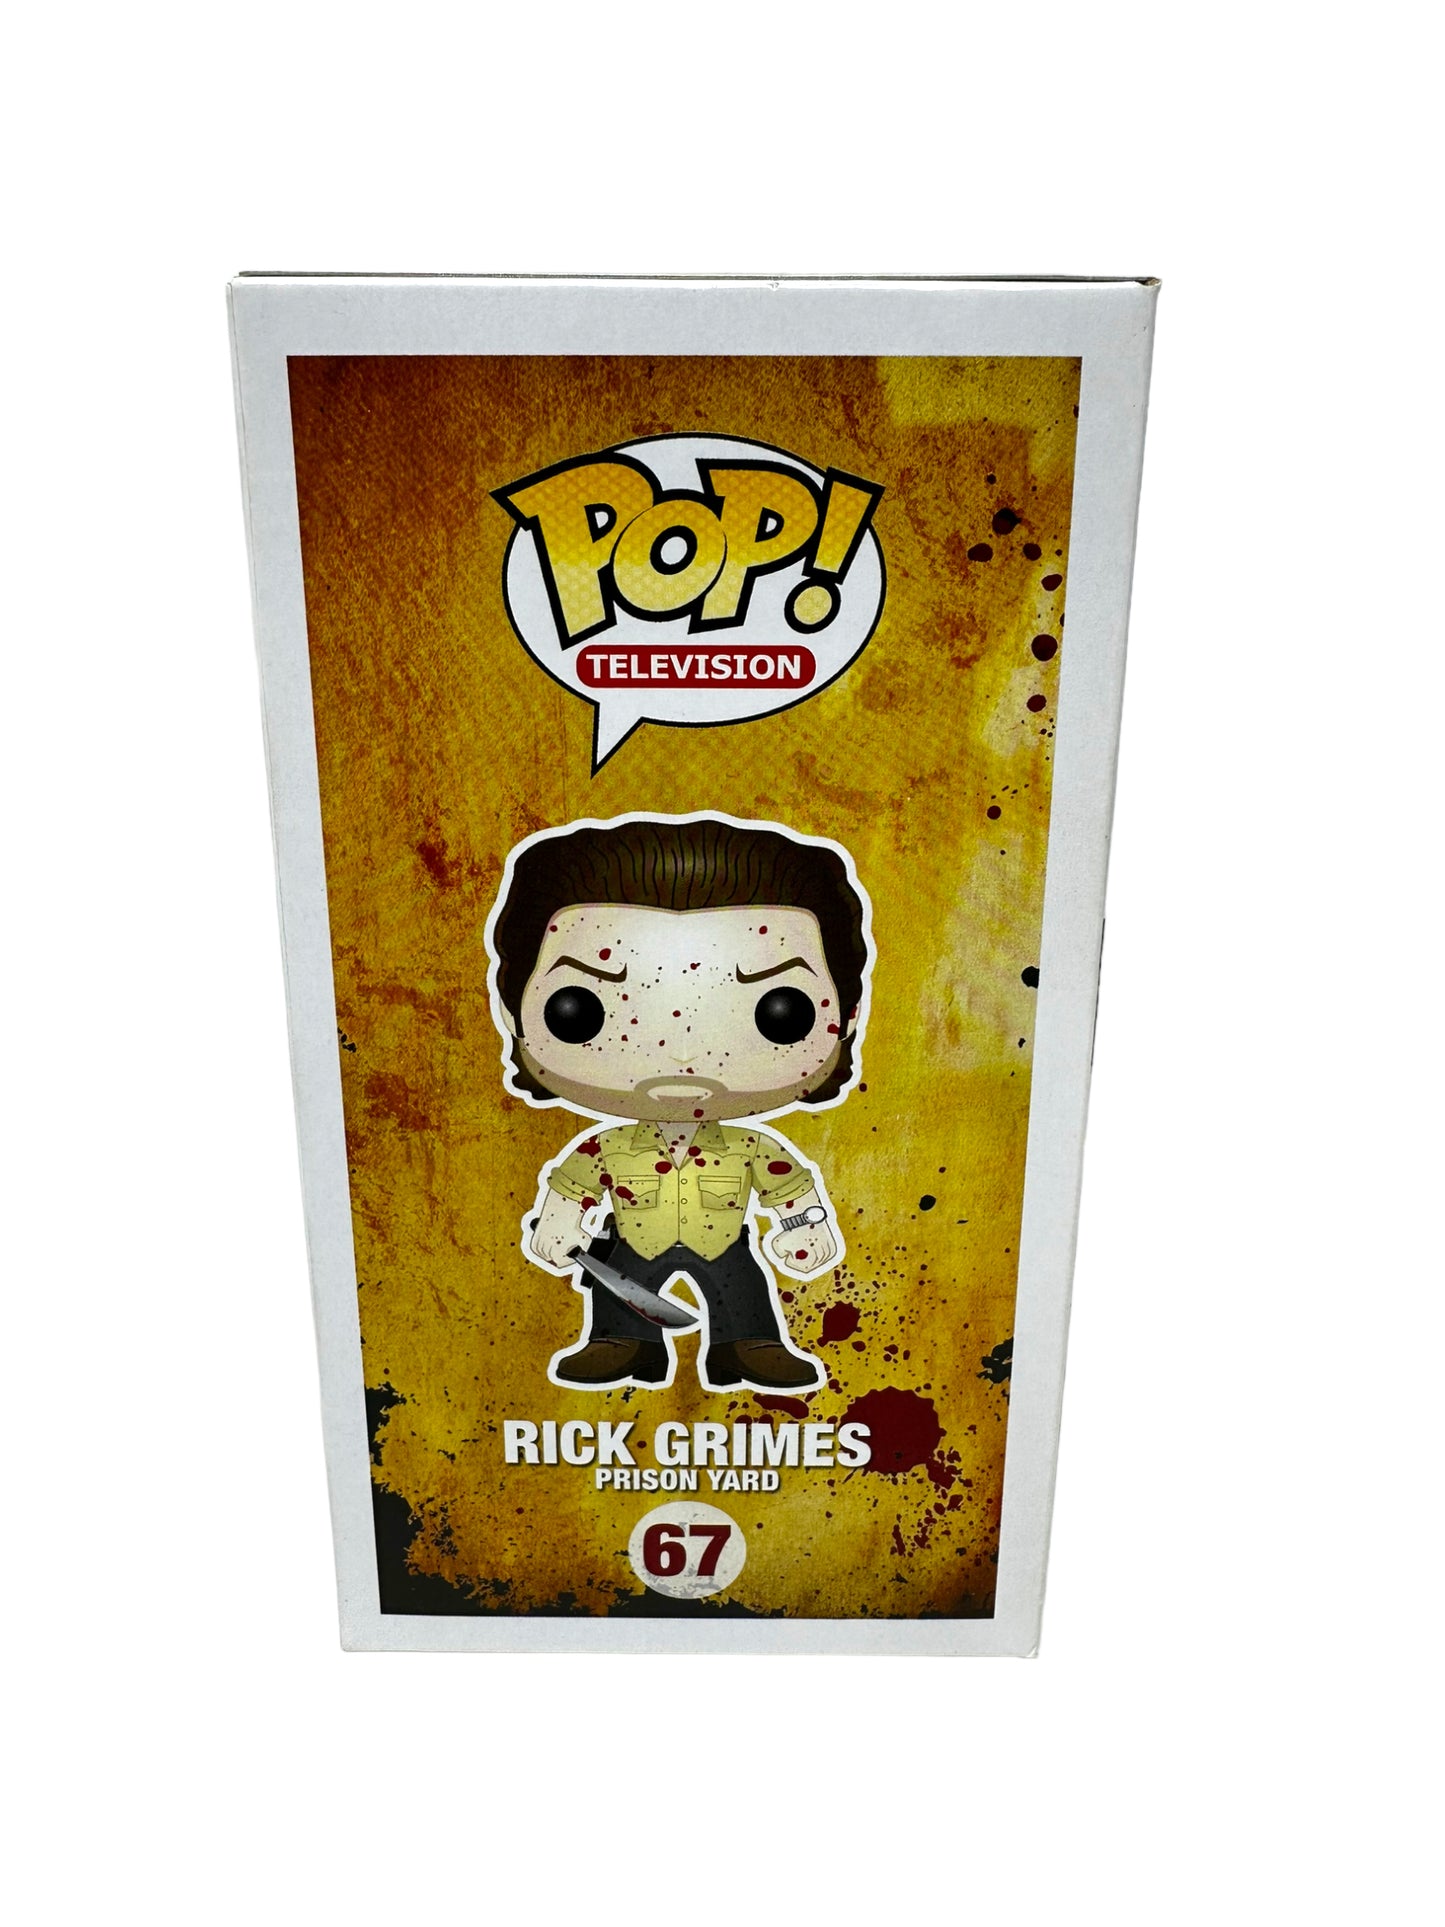 Sold 2013 SDCC Rick Grimes 67 Bloody